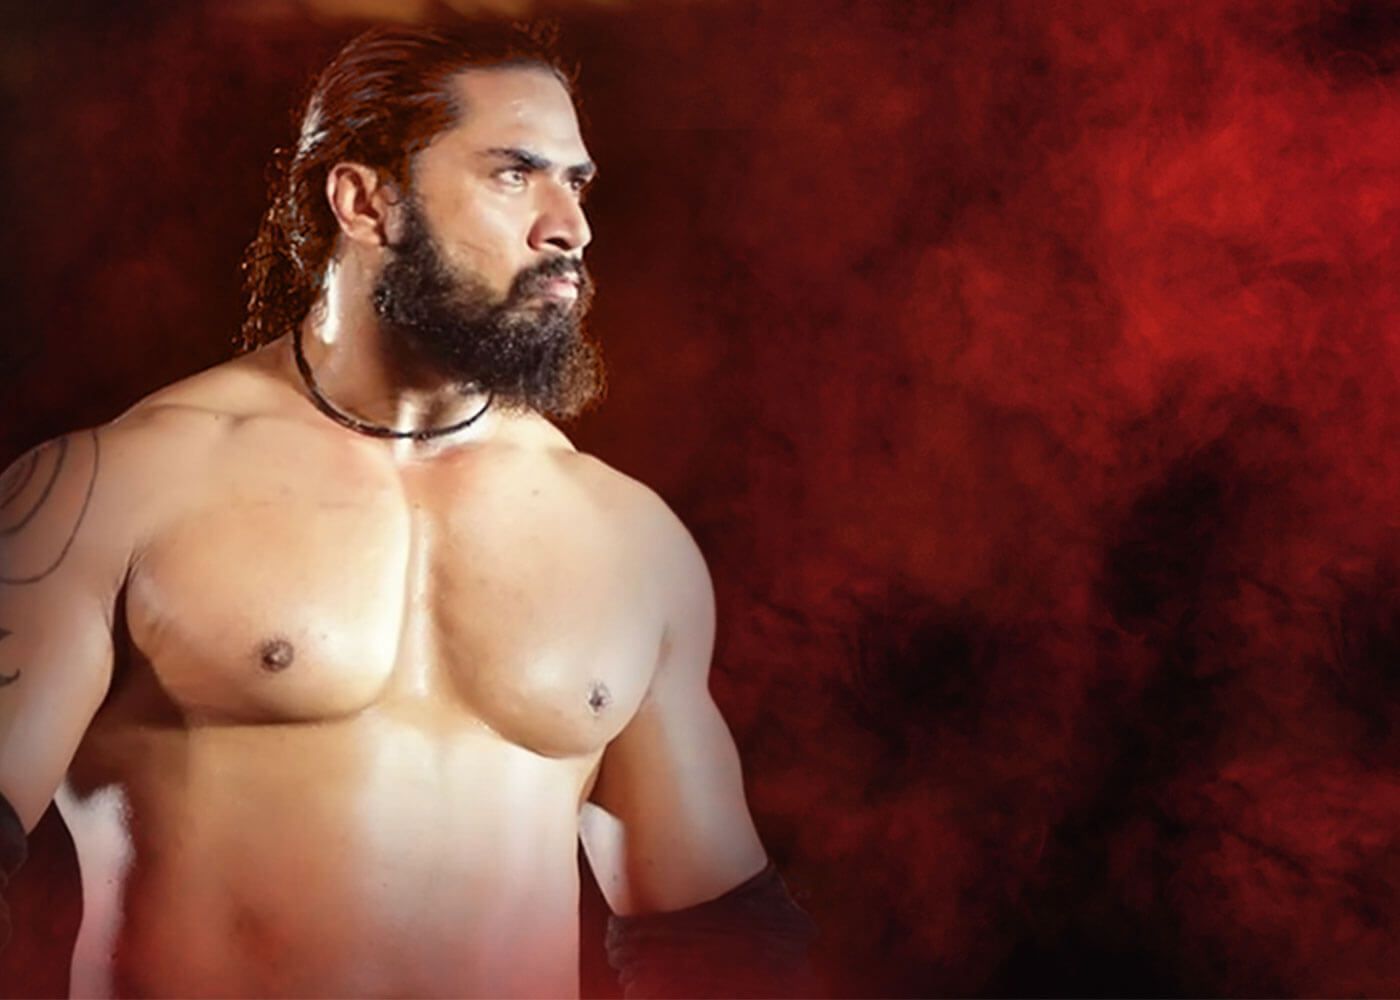 Top Indian Professional Wrestler in WWE, NXT and Impact Wrestling